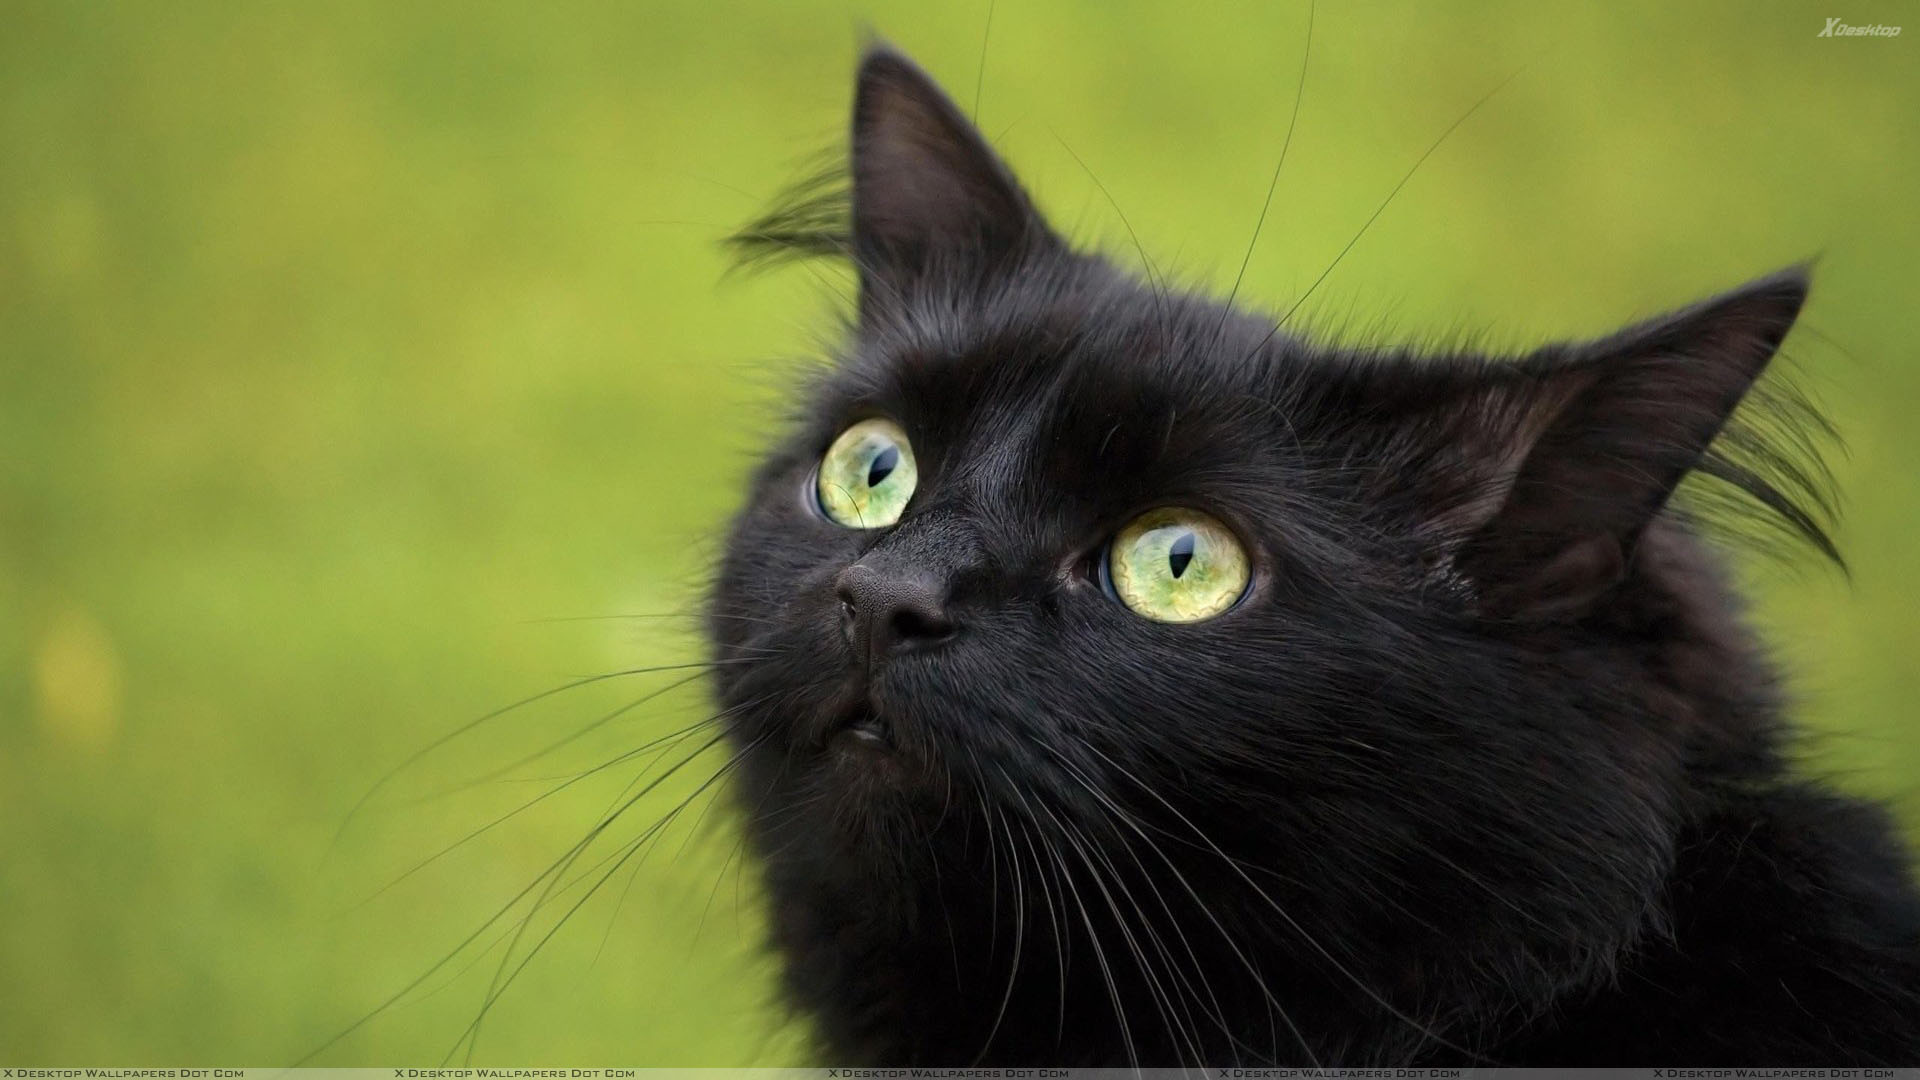 Black Cats Wallpaper Photos Image In HD